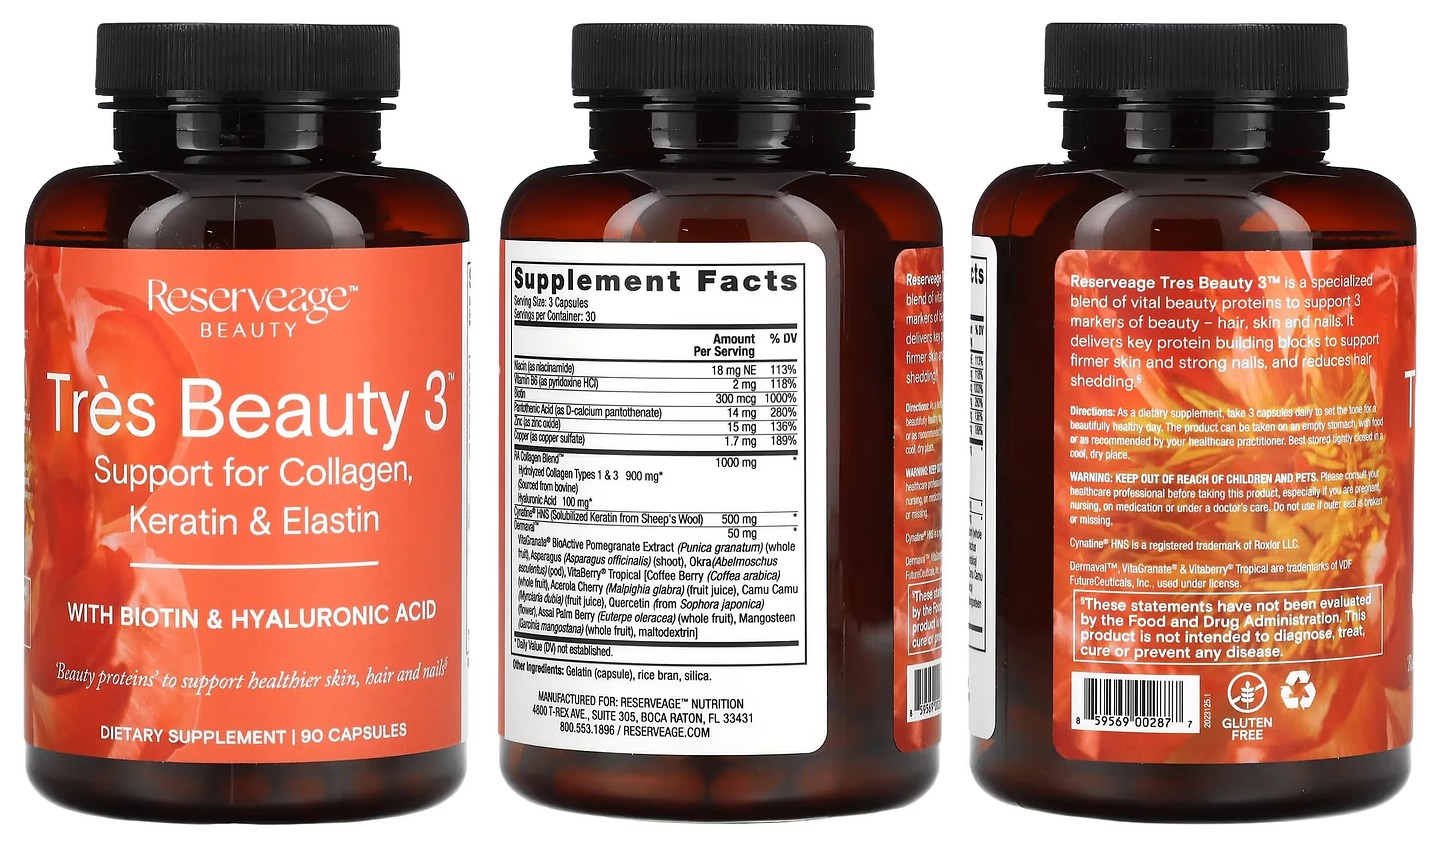 Reserveage Nutrition, Tres Beauty 3 with Biotin & Hyaluronic Acid packaging